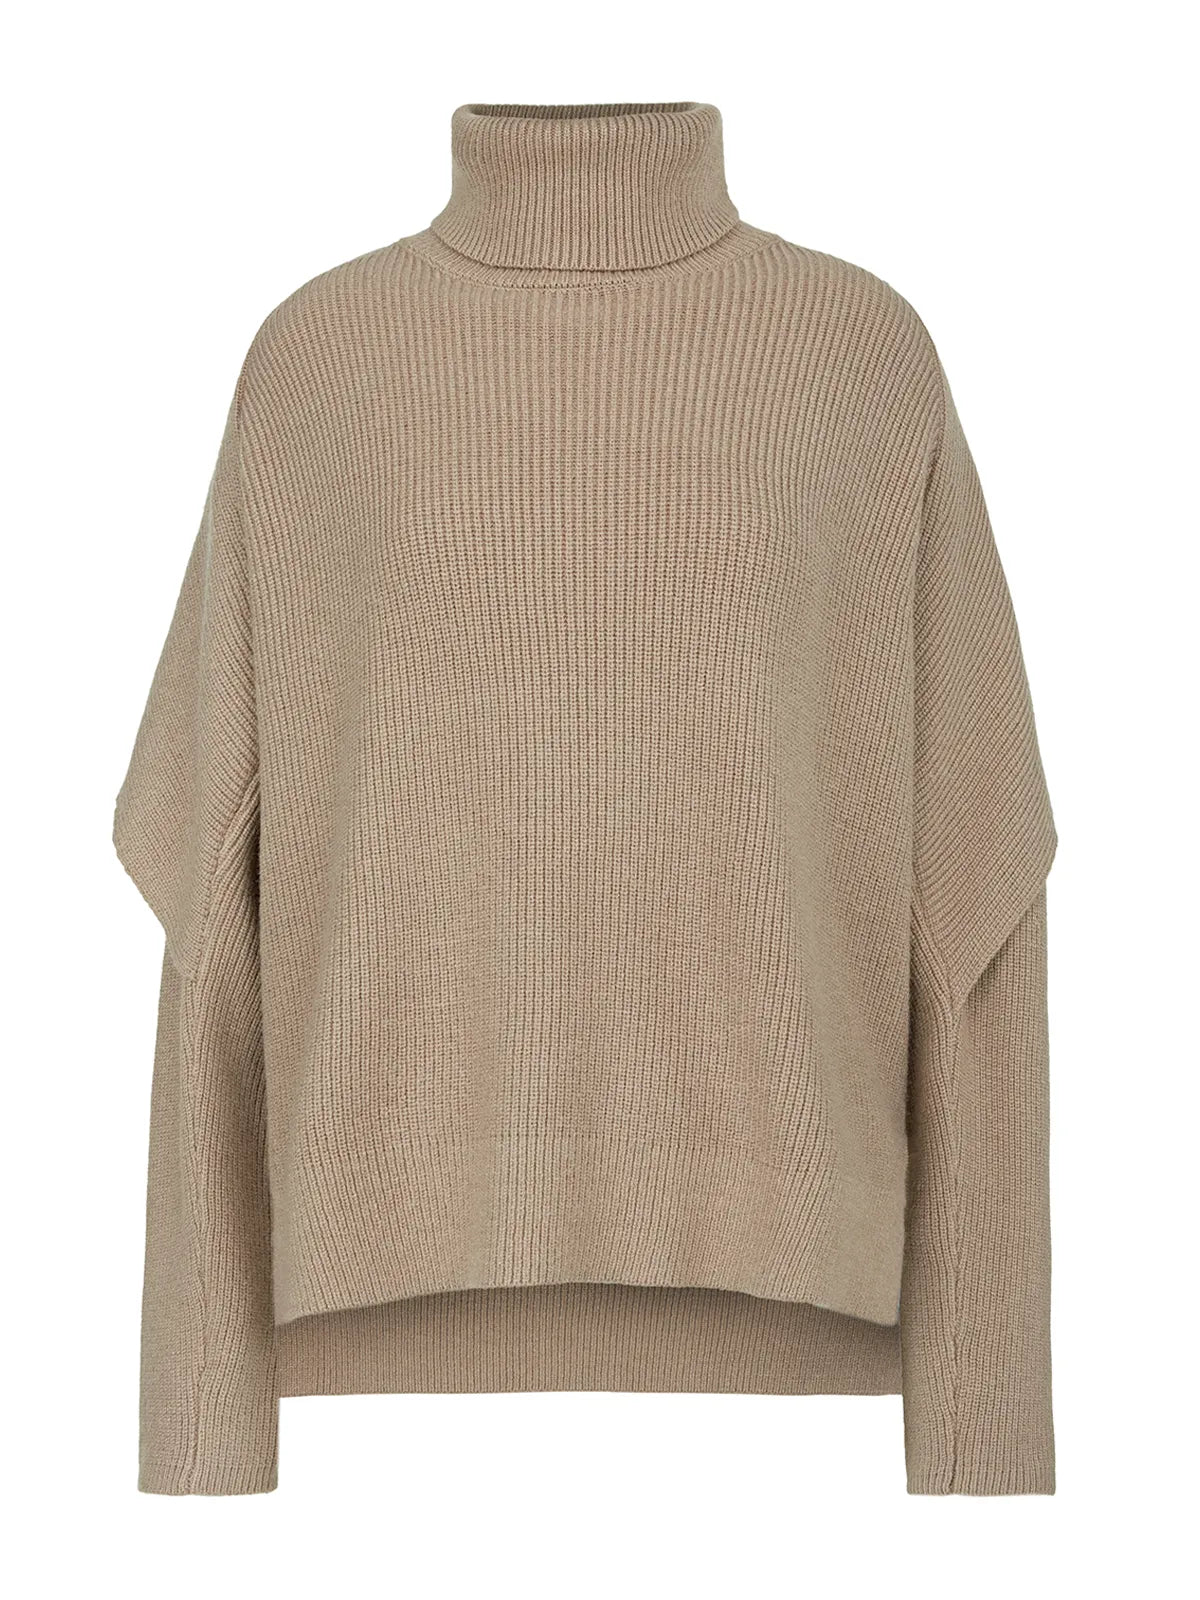 Achieve cozy elegance with this streamlined turtleneck sweater, adorned with unique sleeve detailing for a sophisticated and fashionable winter ensemble.